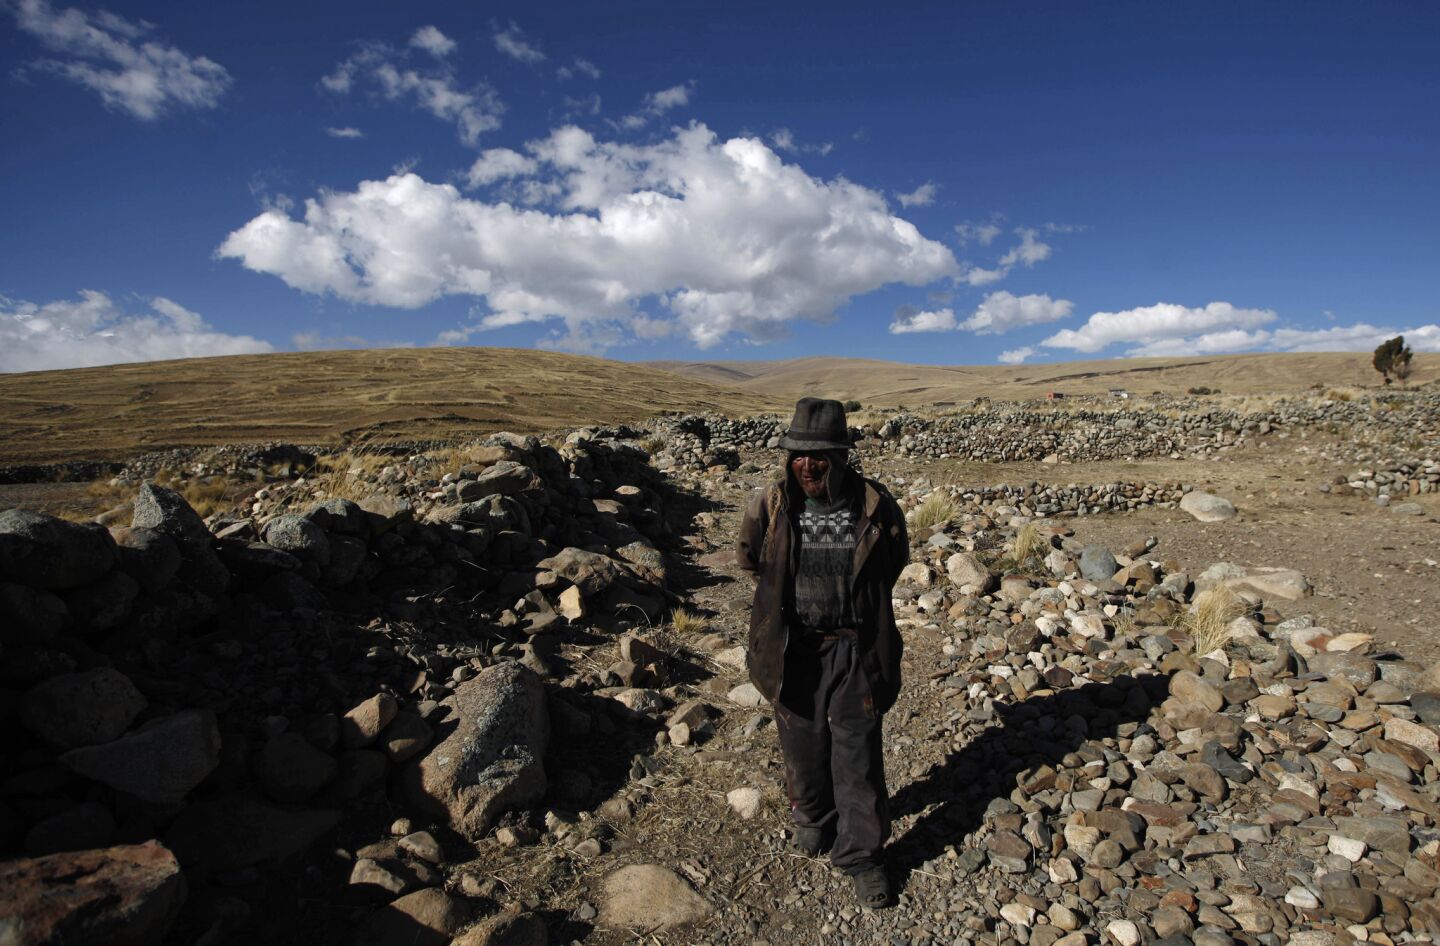 Bolivian may be world's oldest person